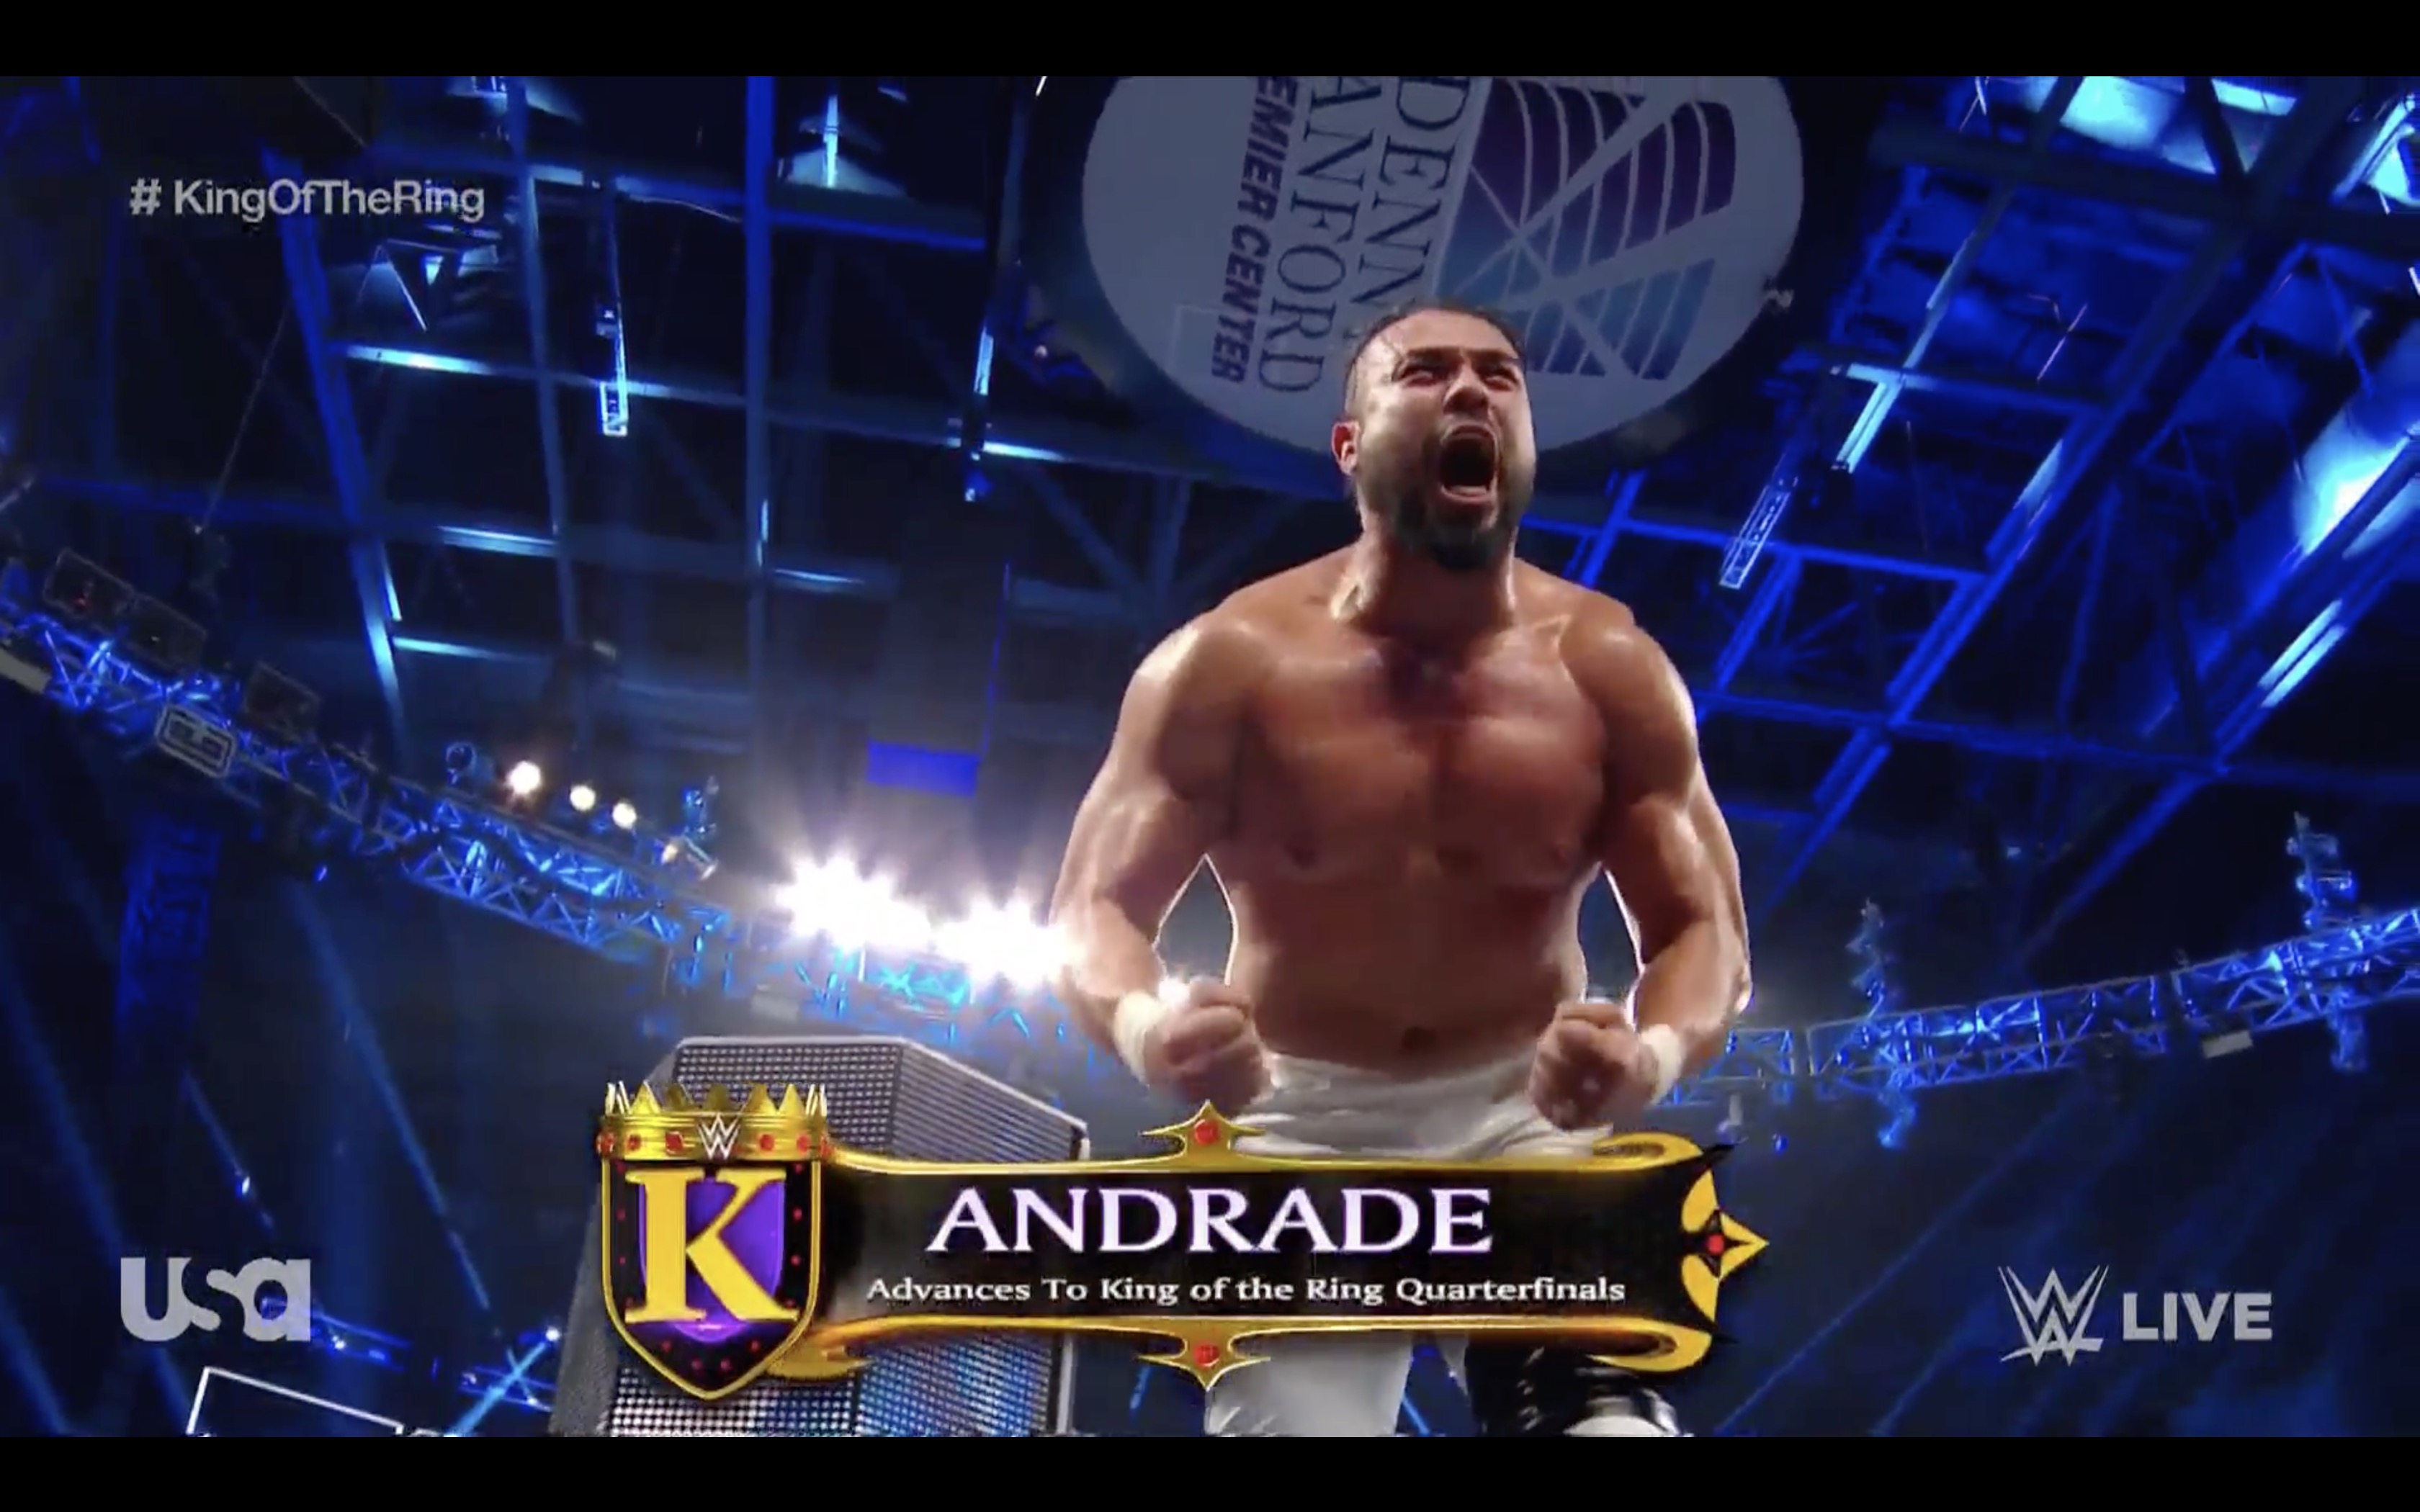 King of the Ring 2019 Andrade